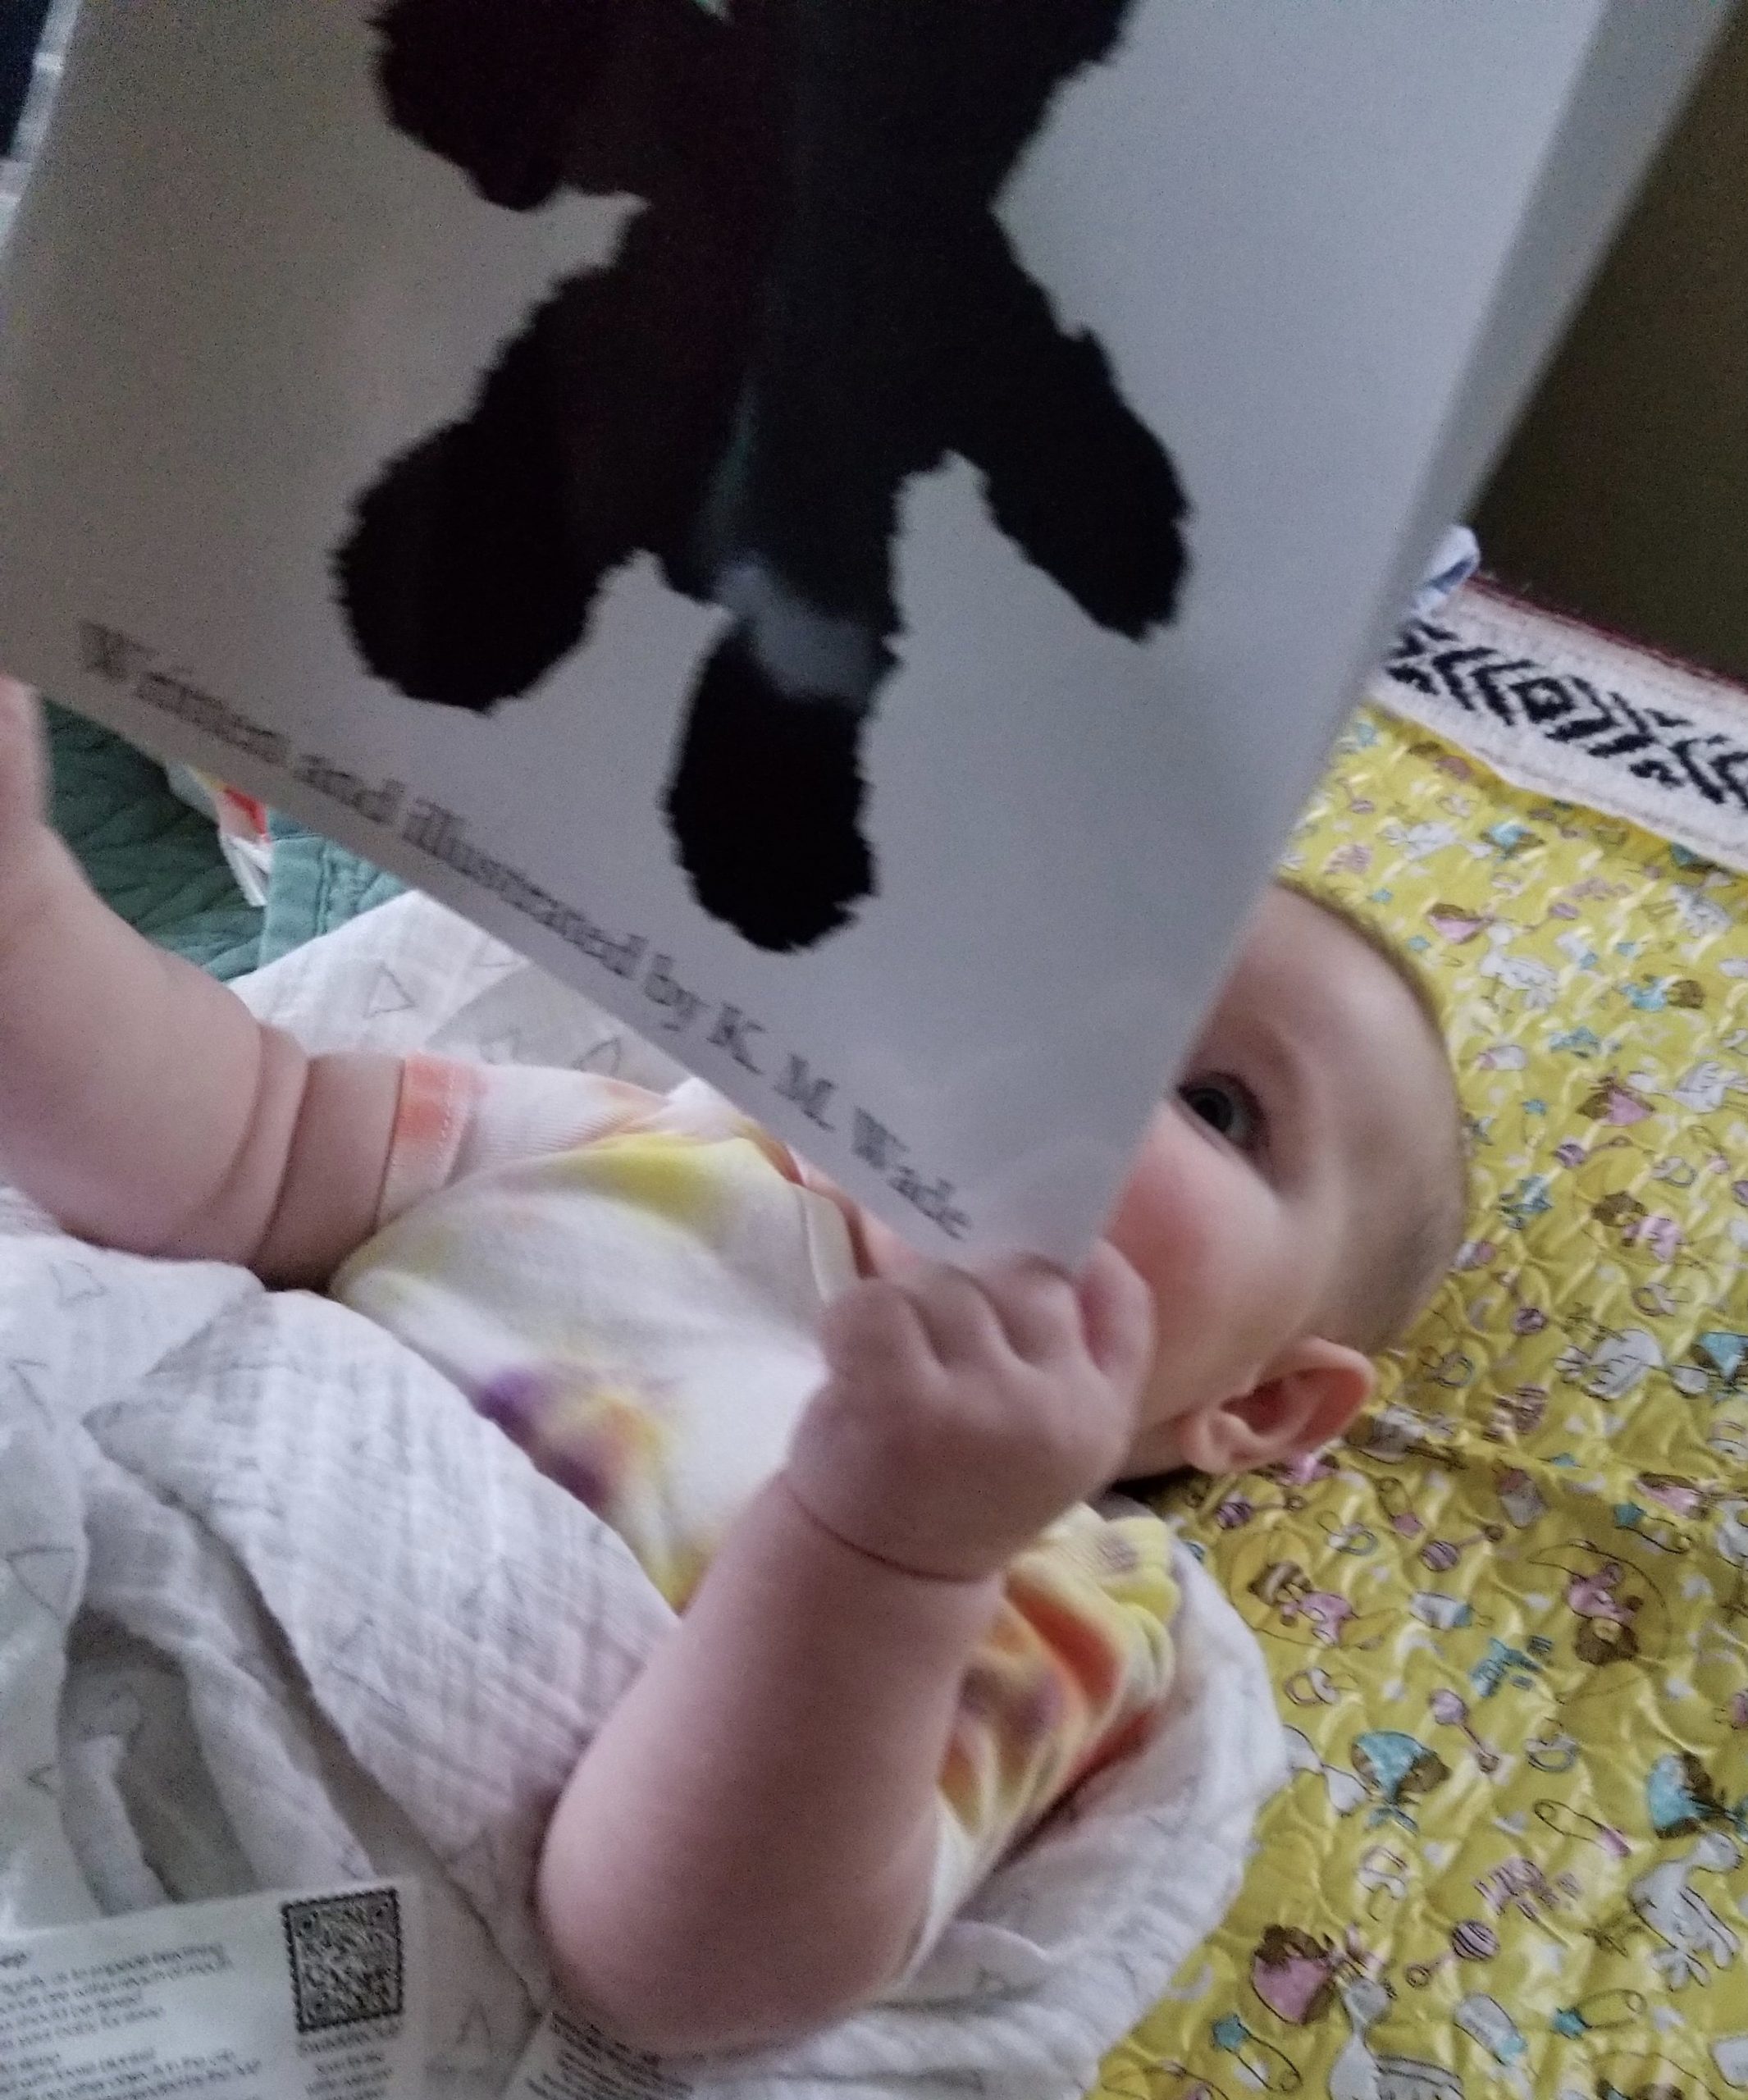 Black and white baby book for newborns: This 3-month-old loves the personalised black and white picture book for newborns ‘Where’s My Teddy?’. He’s holding it and gazing at it intently.